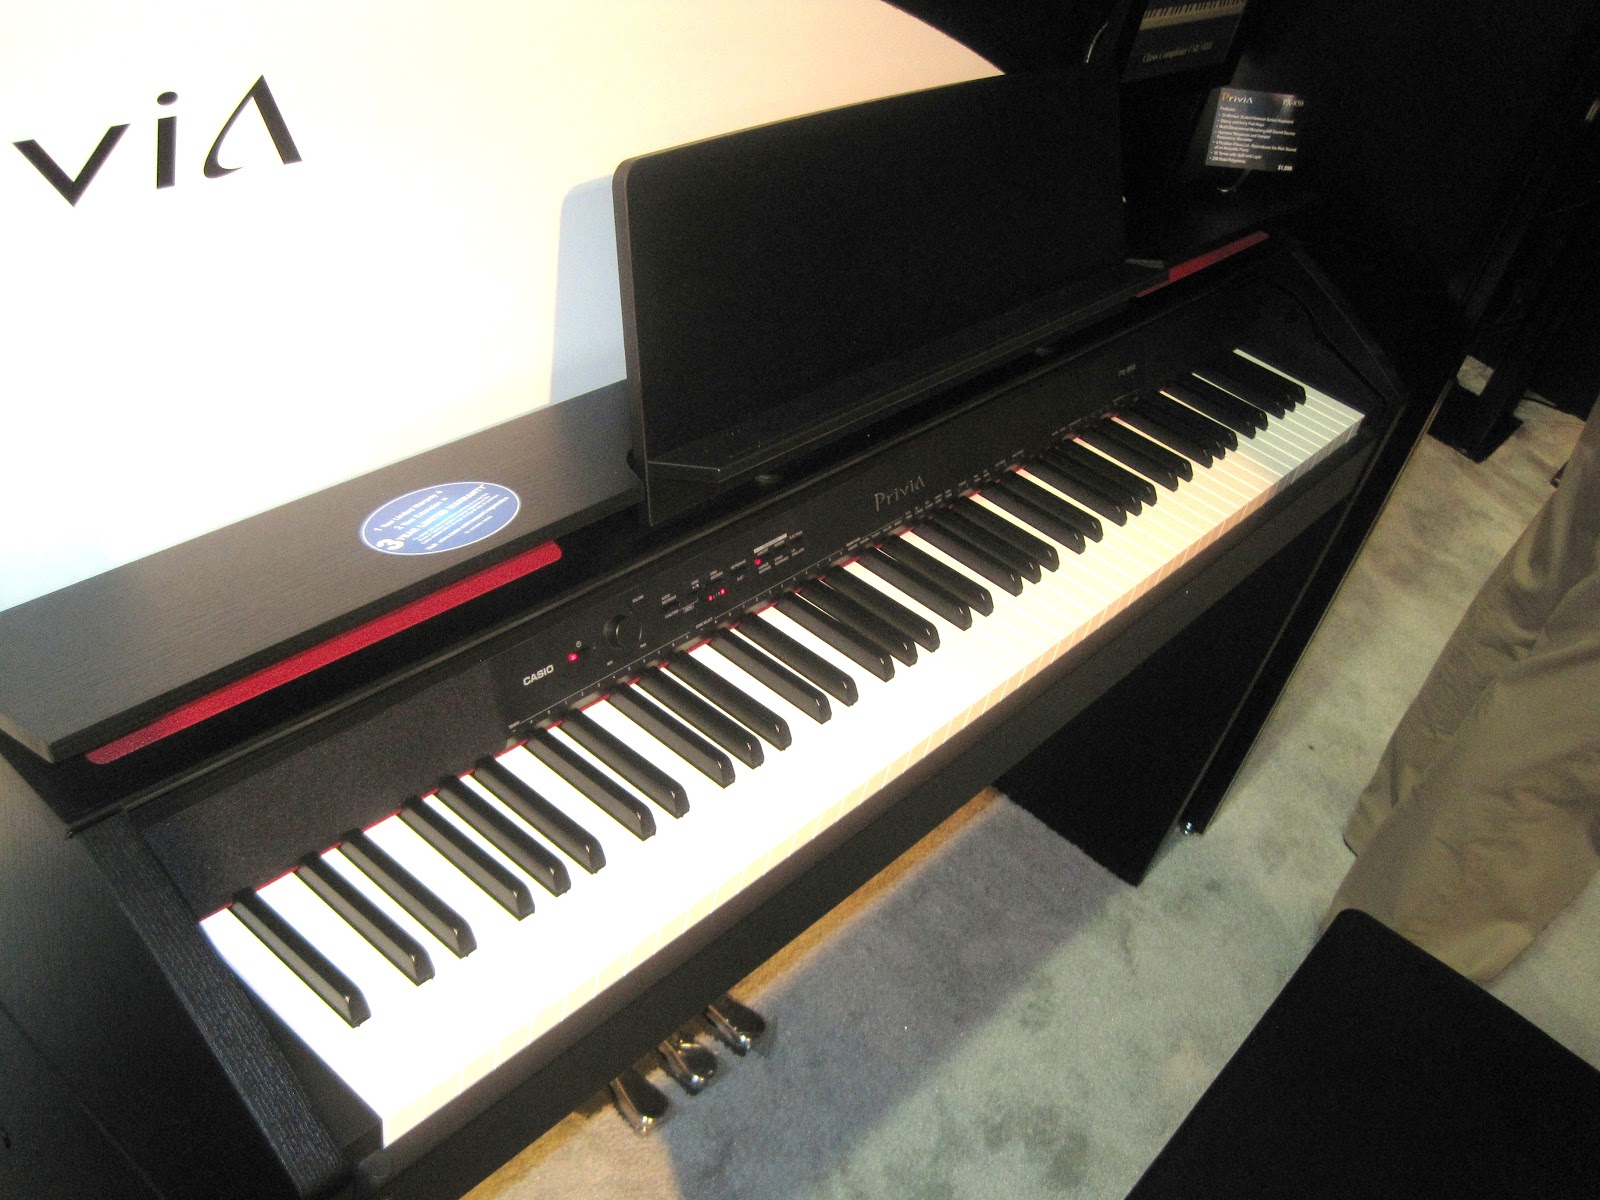 REVIEW - CASIO PX850 Digital Piano - 88 weighted keys